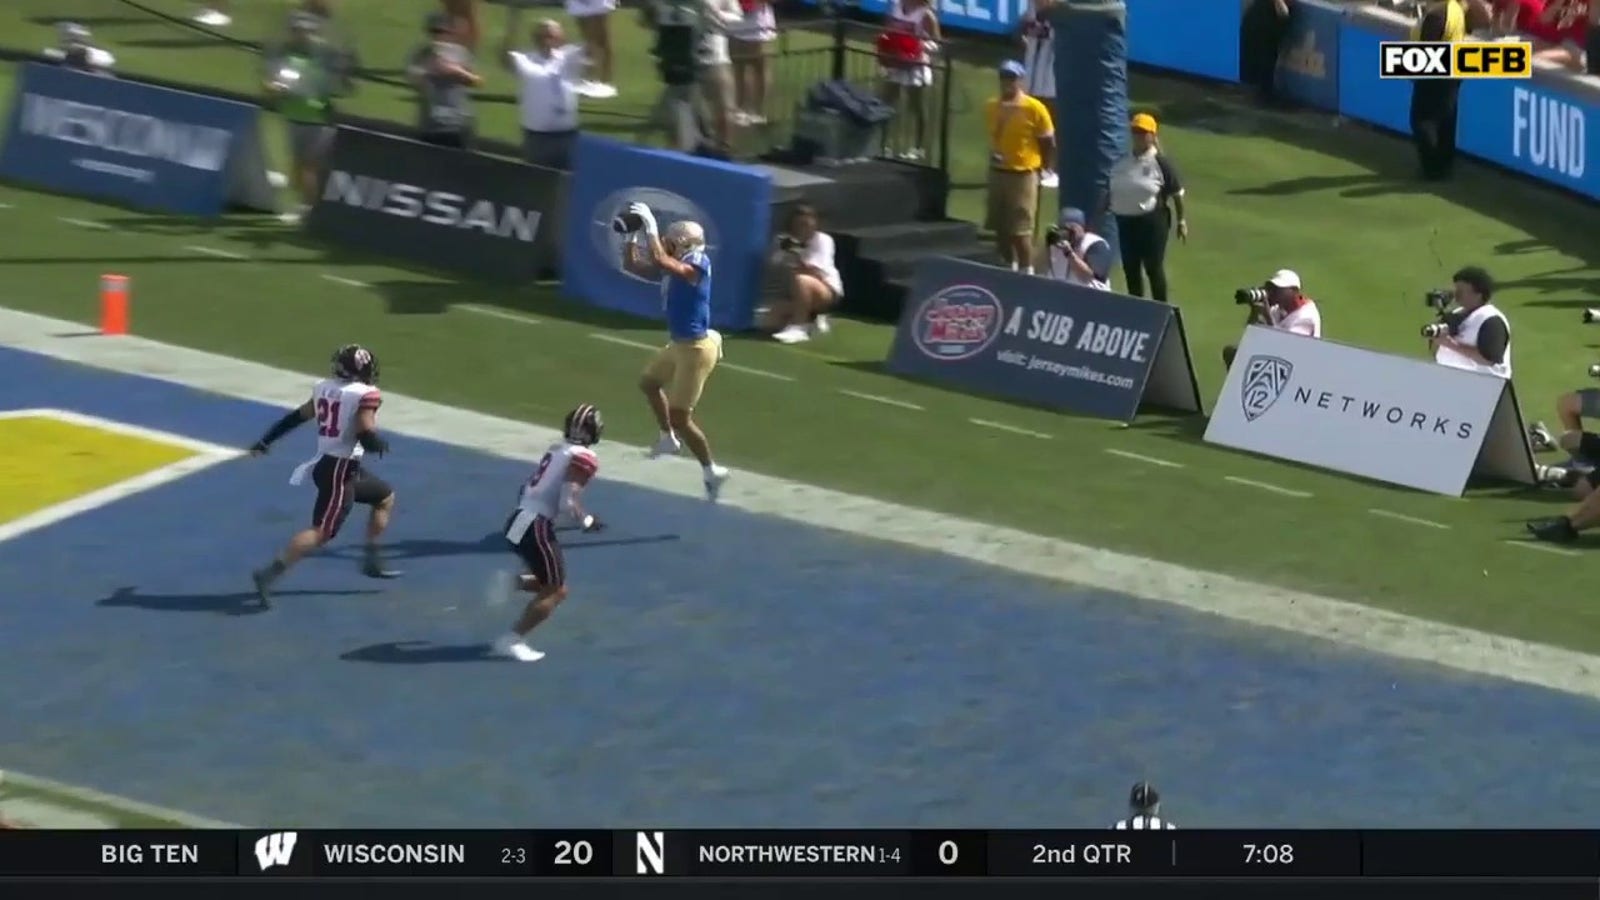 Jake Bobo scores a touchdown to extend UCLA's lead to 14-3